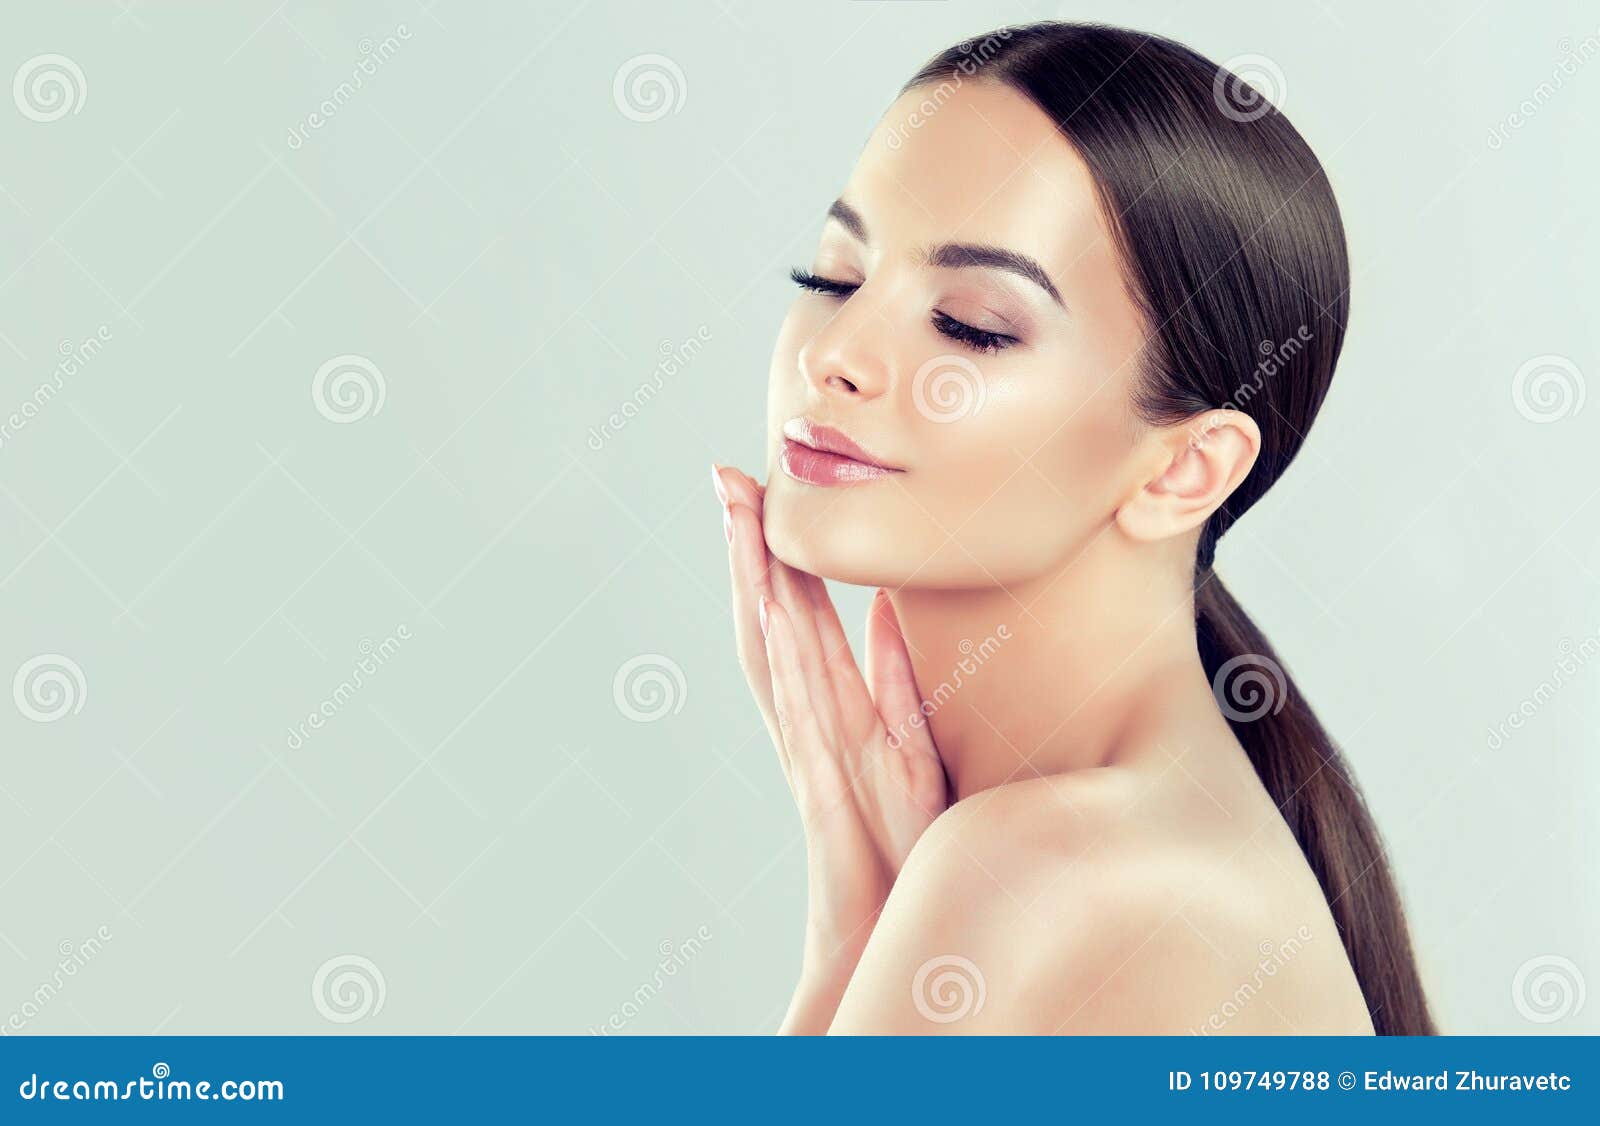 portrait of young woman with clean fresh skin and soft, delicate make up. woman is touching to own face tenderly.